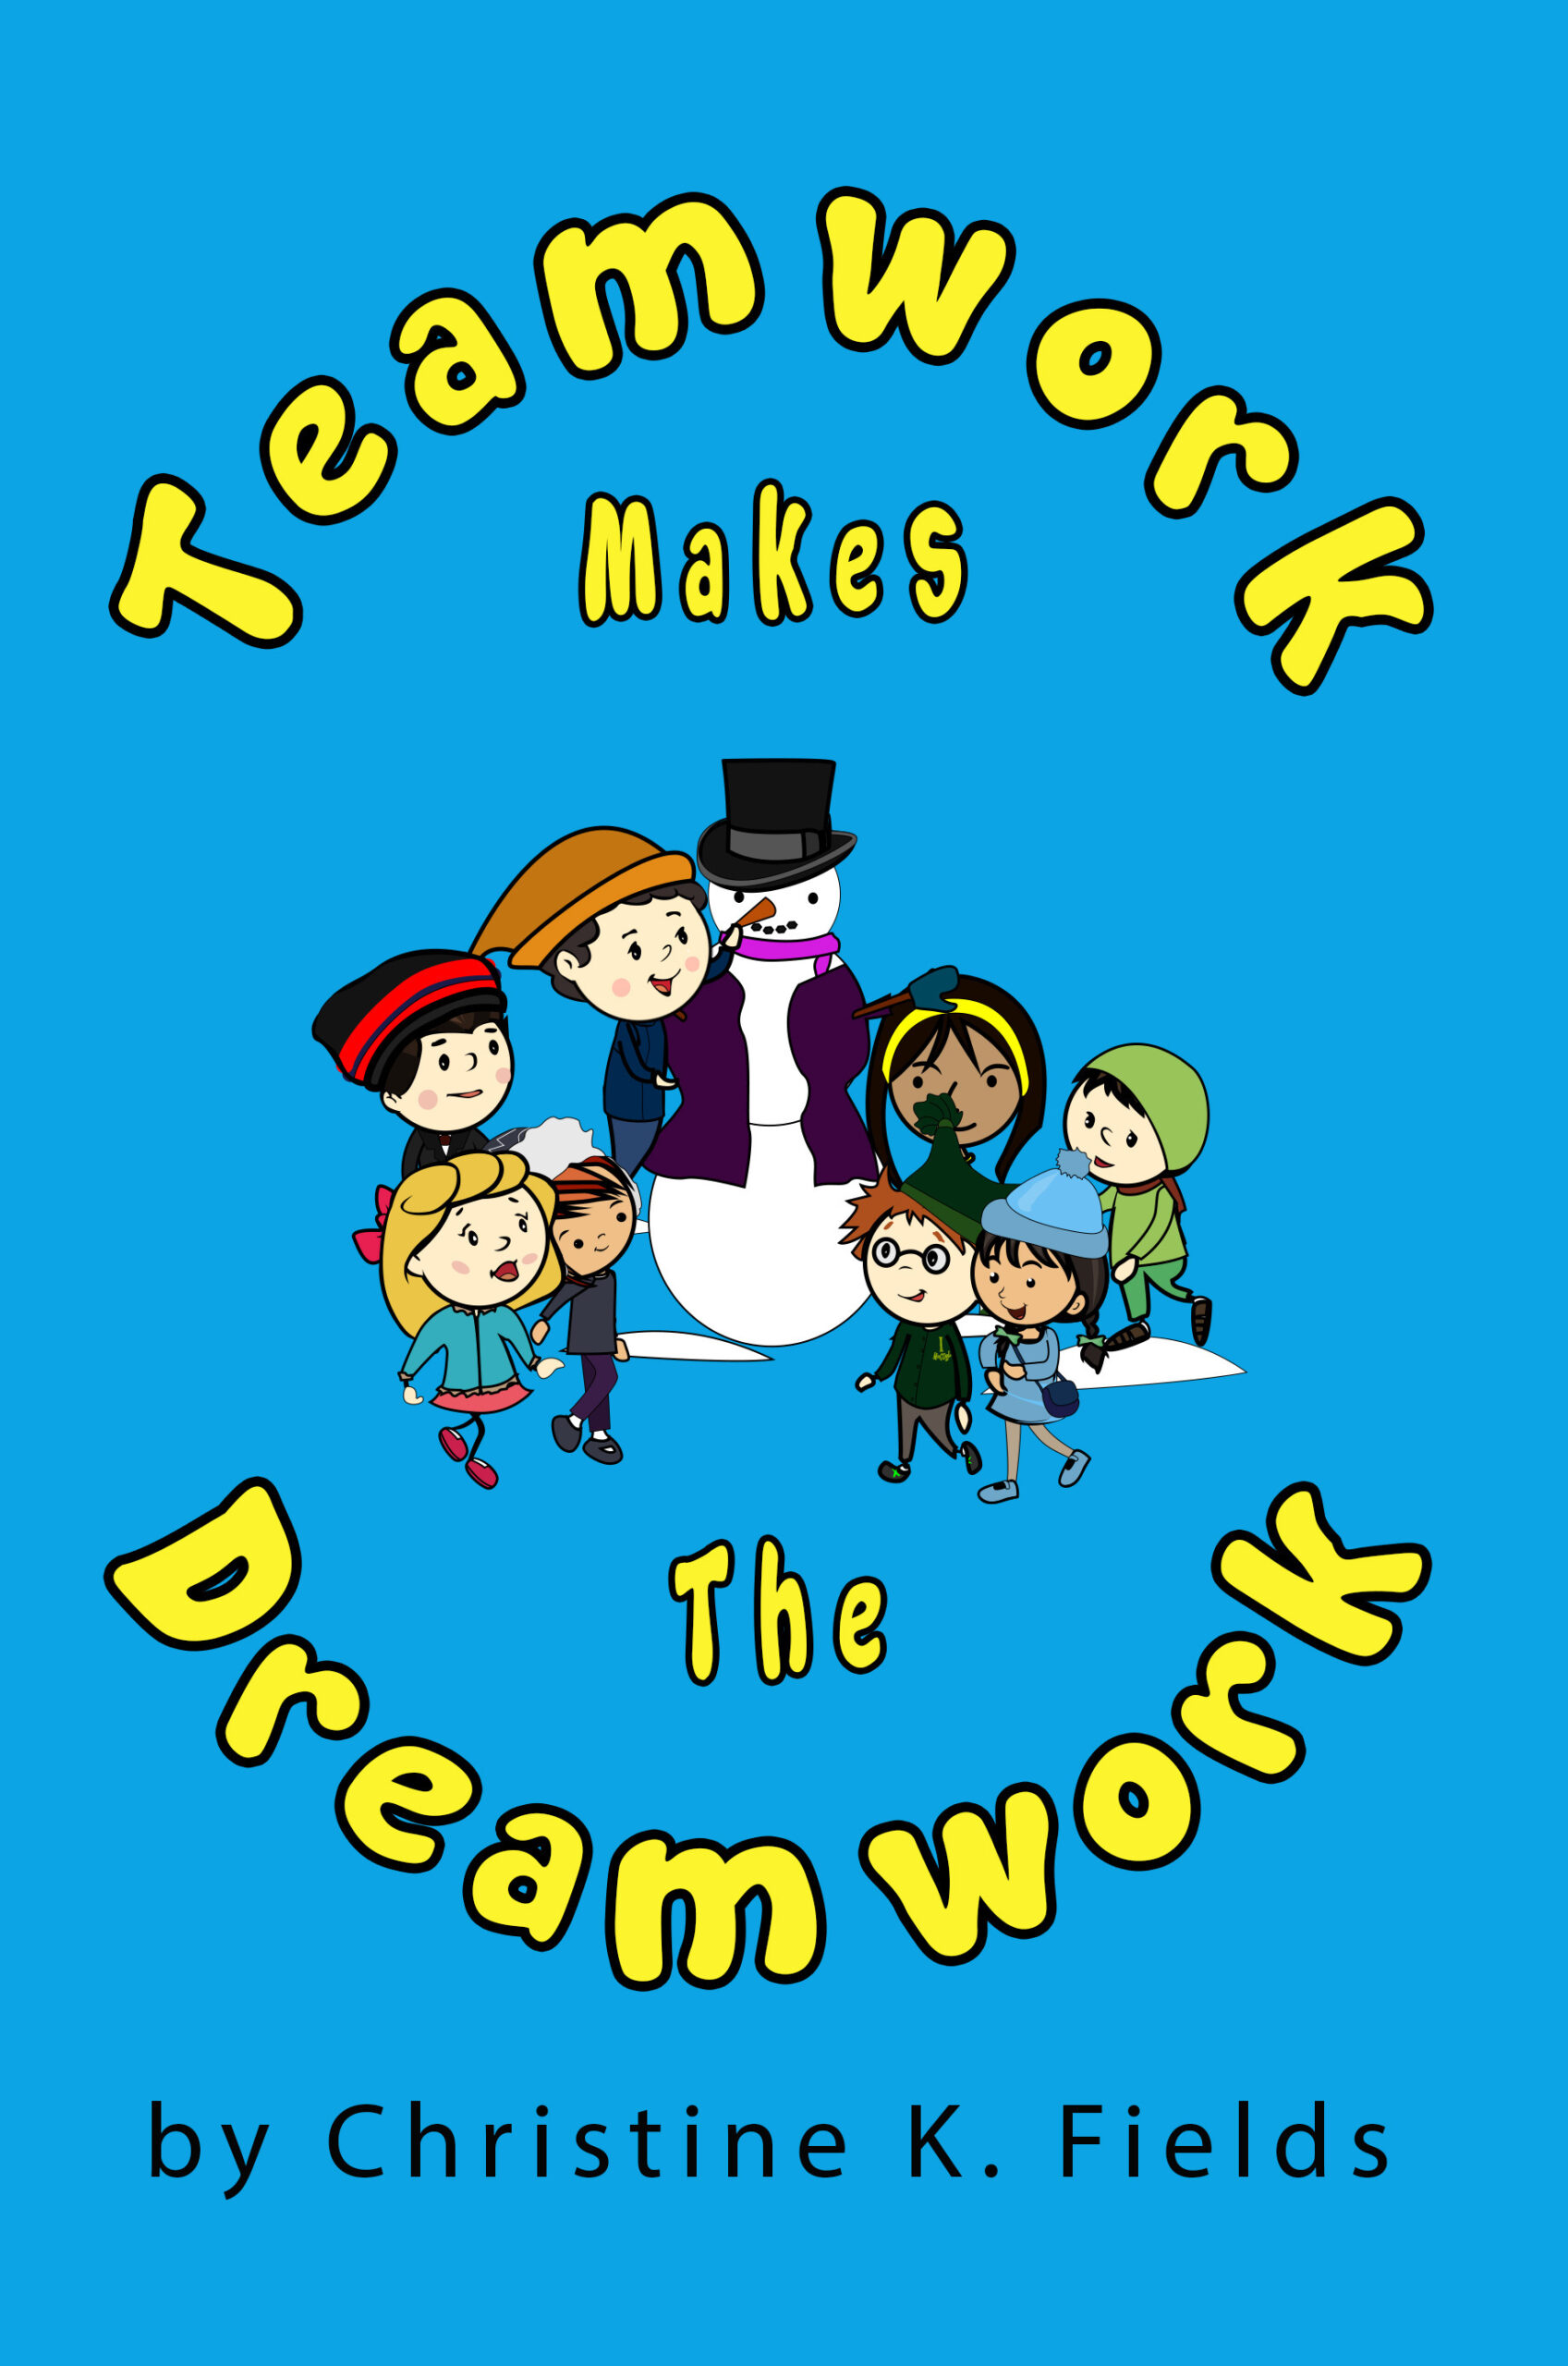 FREE: Teamwork Makes The Dream Work: Together Everyone Achieves More by Christine K Fields